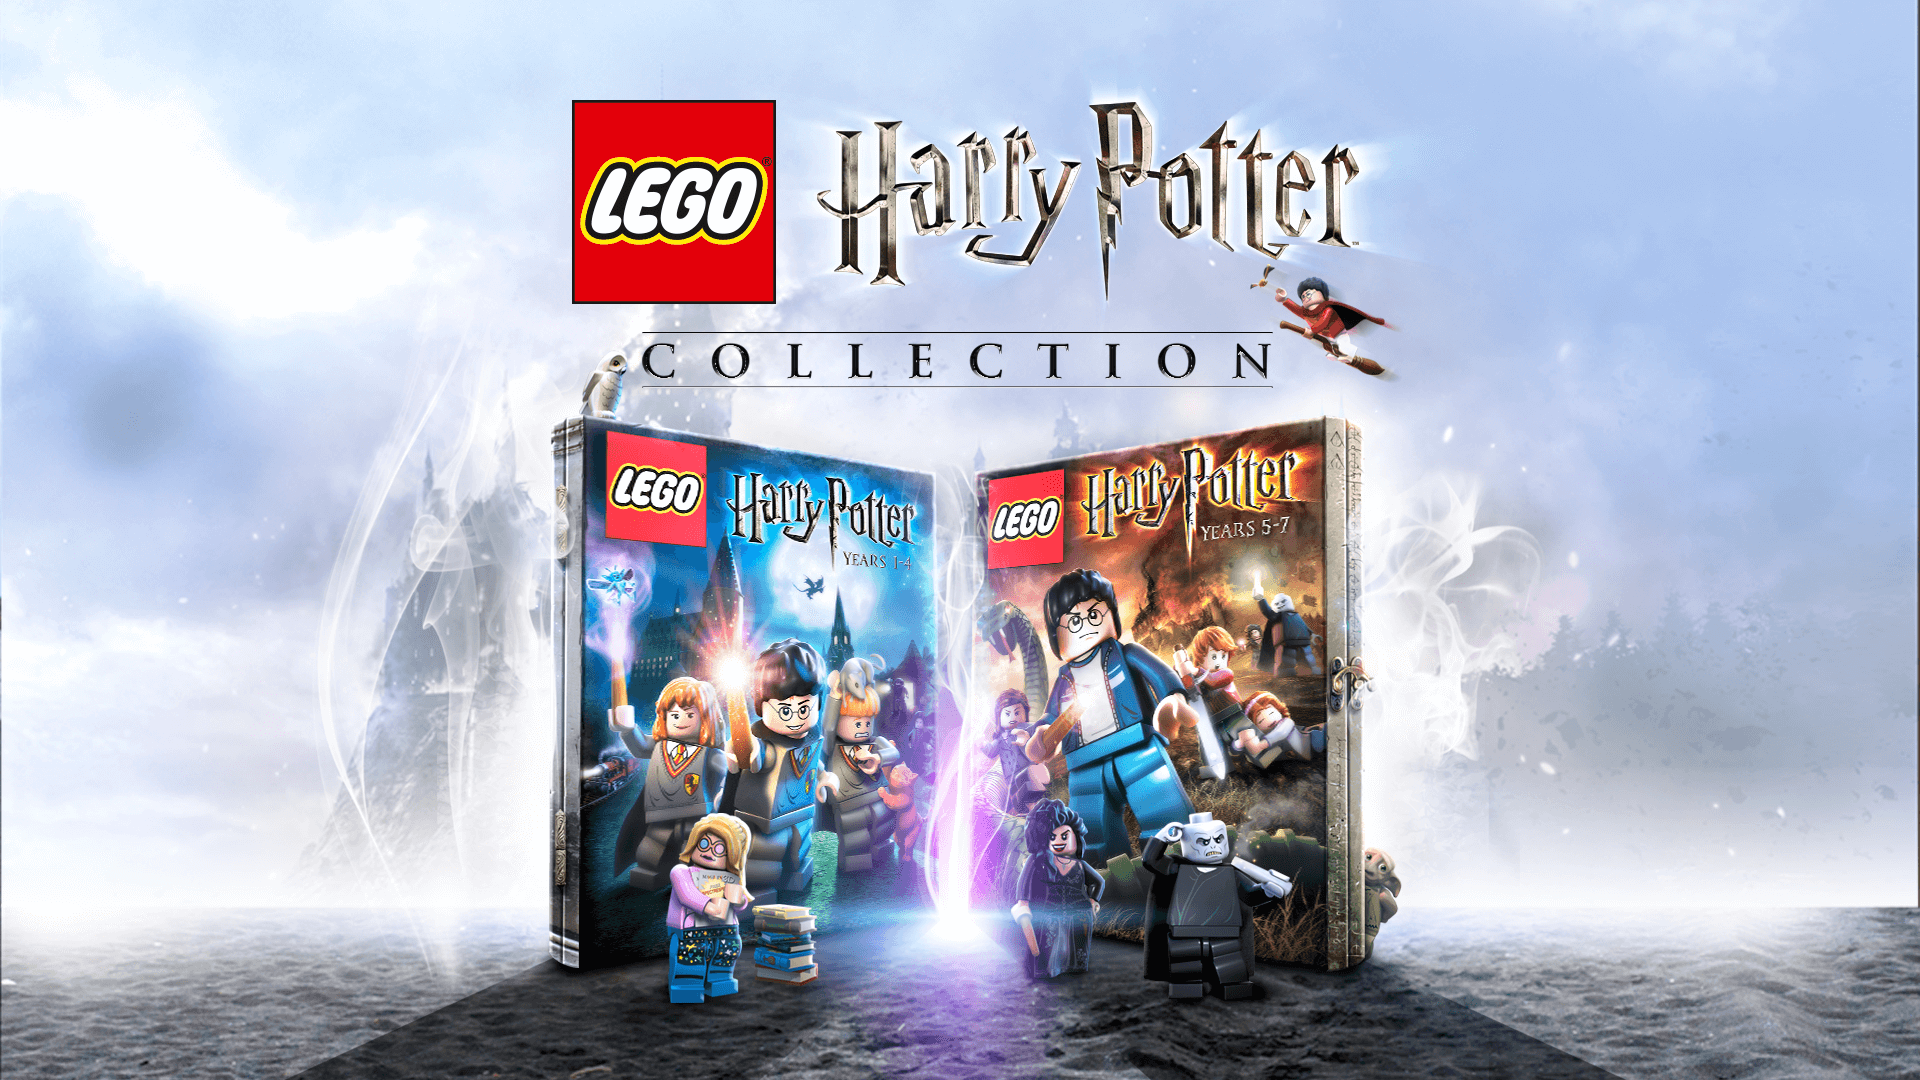 midnat skandale Pastor LEGO Harry Potter Collection Achievements @ Gamertag Nation